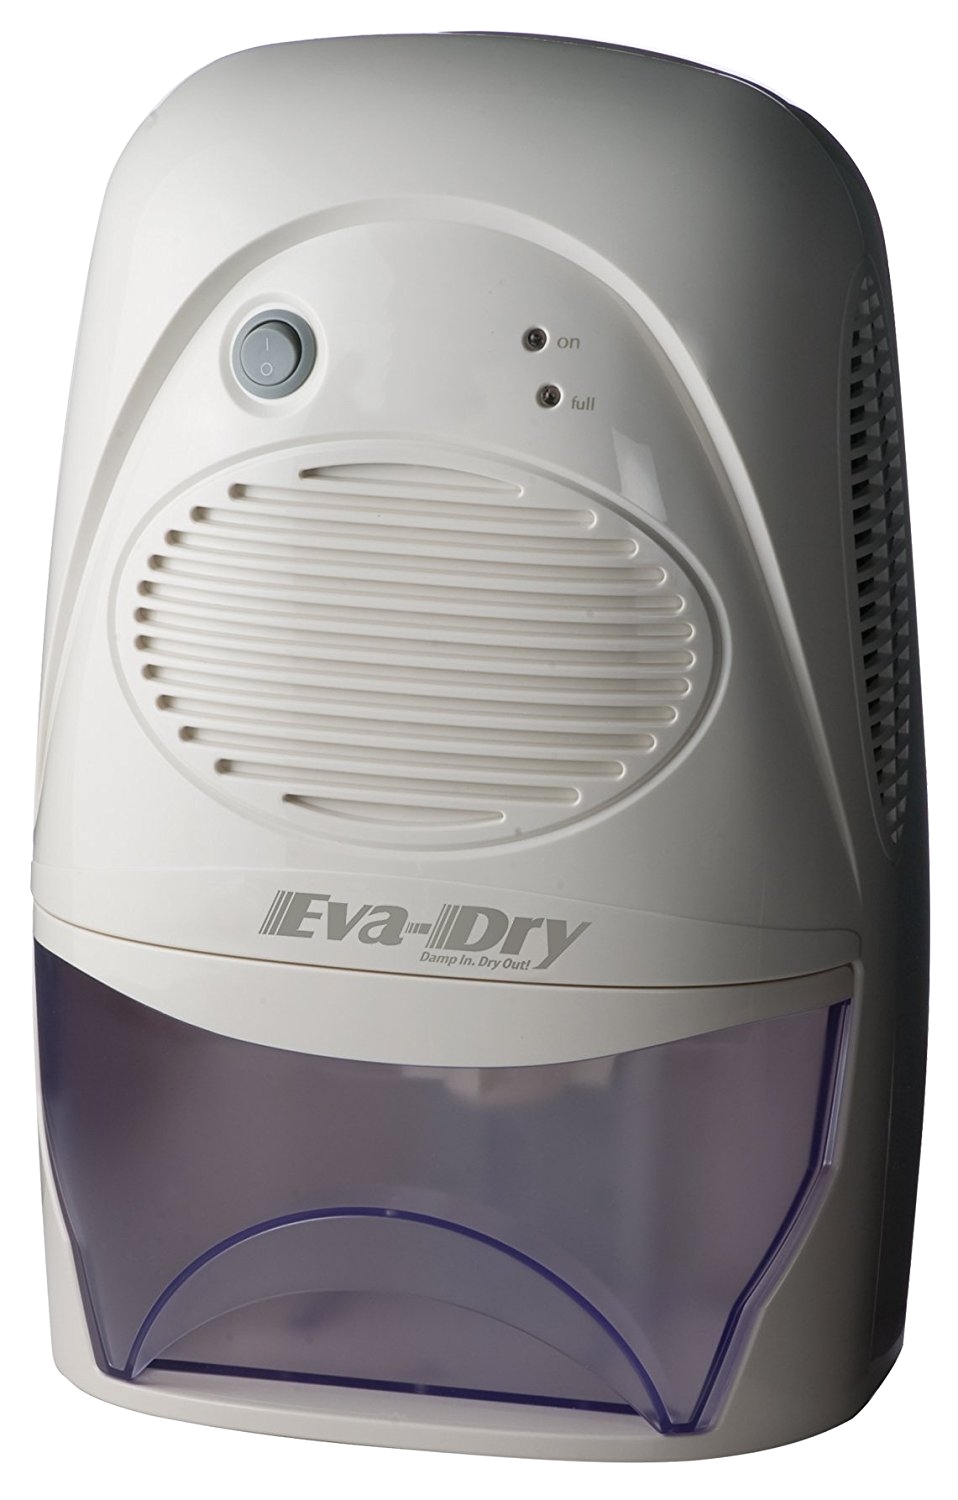 amazon com eva dry edv 2200 powerful electric mid size dehumidifier great areas up to 2200 cubic feet